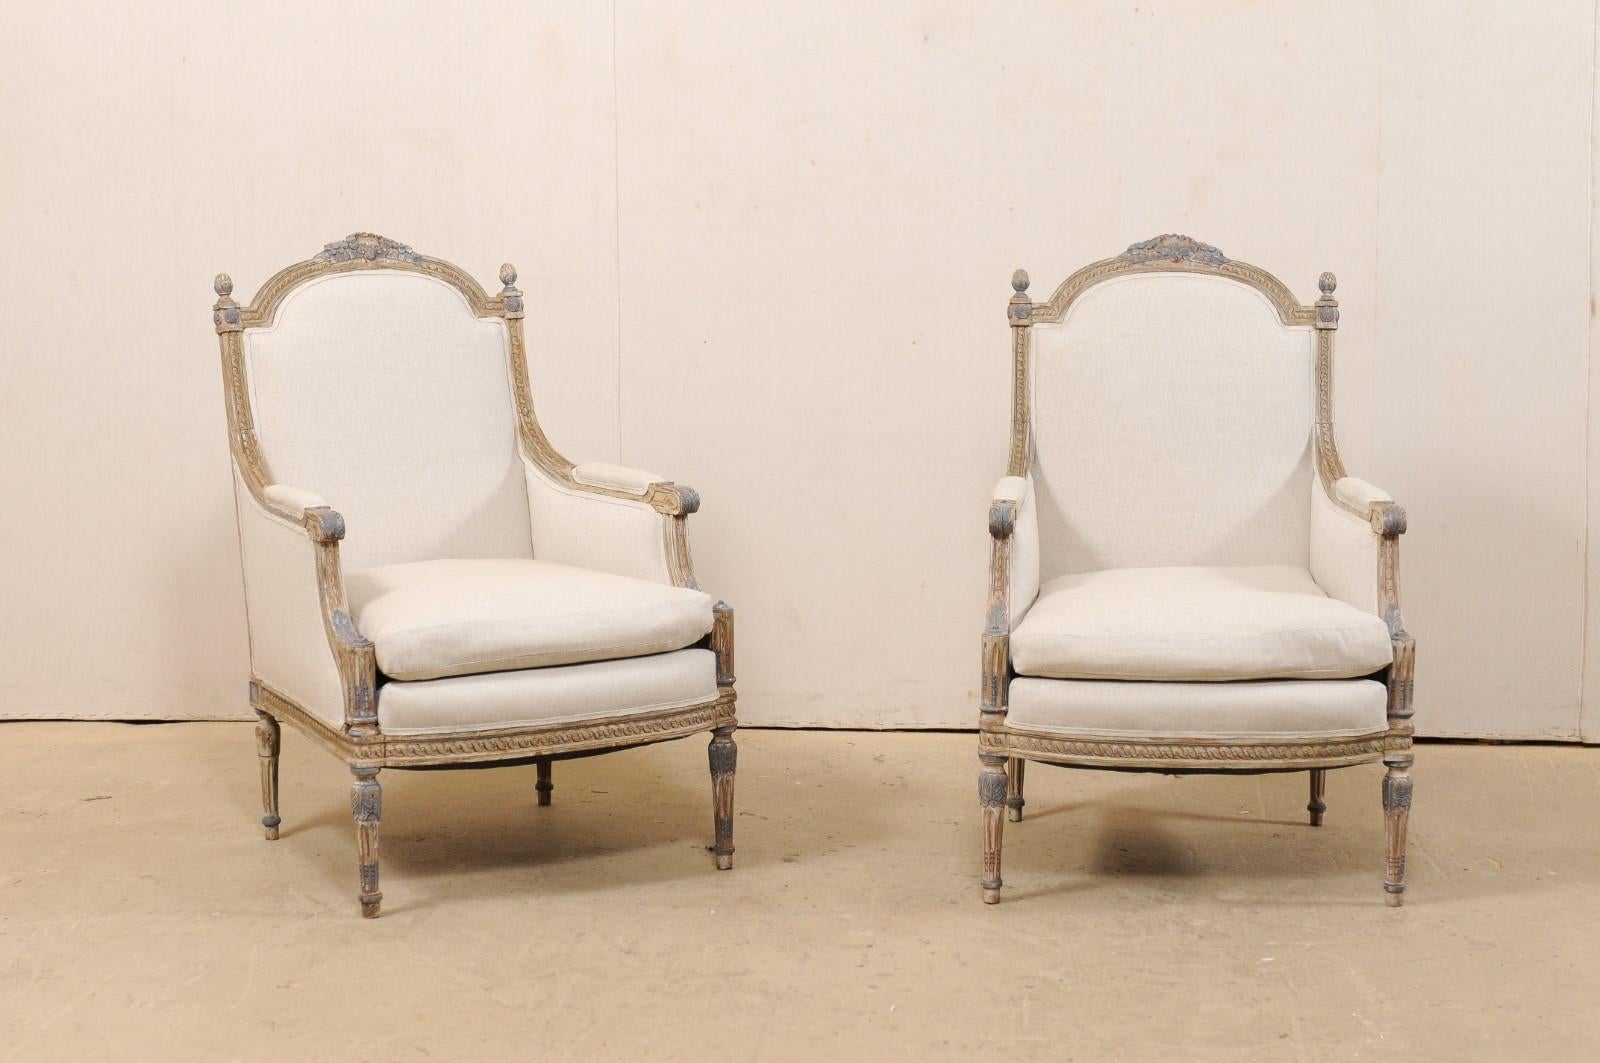 A French pair of occasional bergère chairs from the 19th century, with new upholstery. This antique pair of Louis XVI style armchairs from France each features a beautifully carved arched back-rail with foliage crest at center, a prominent pair of